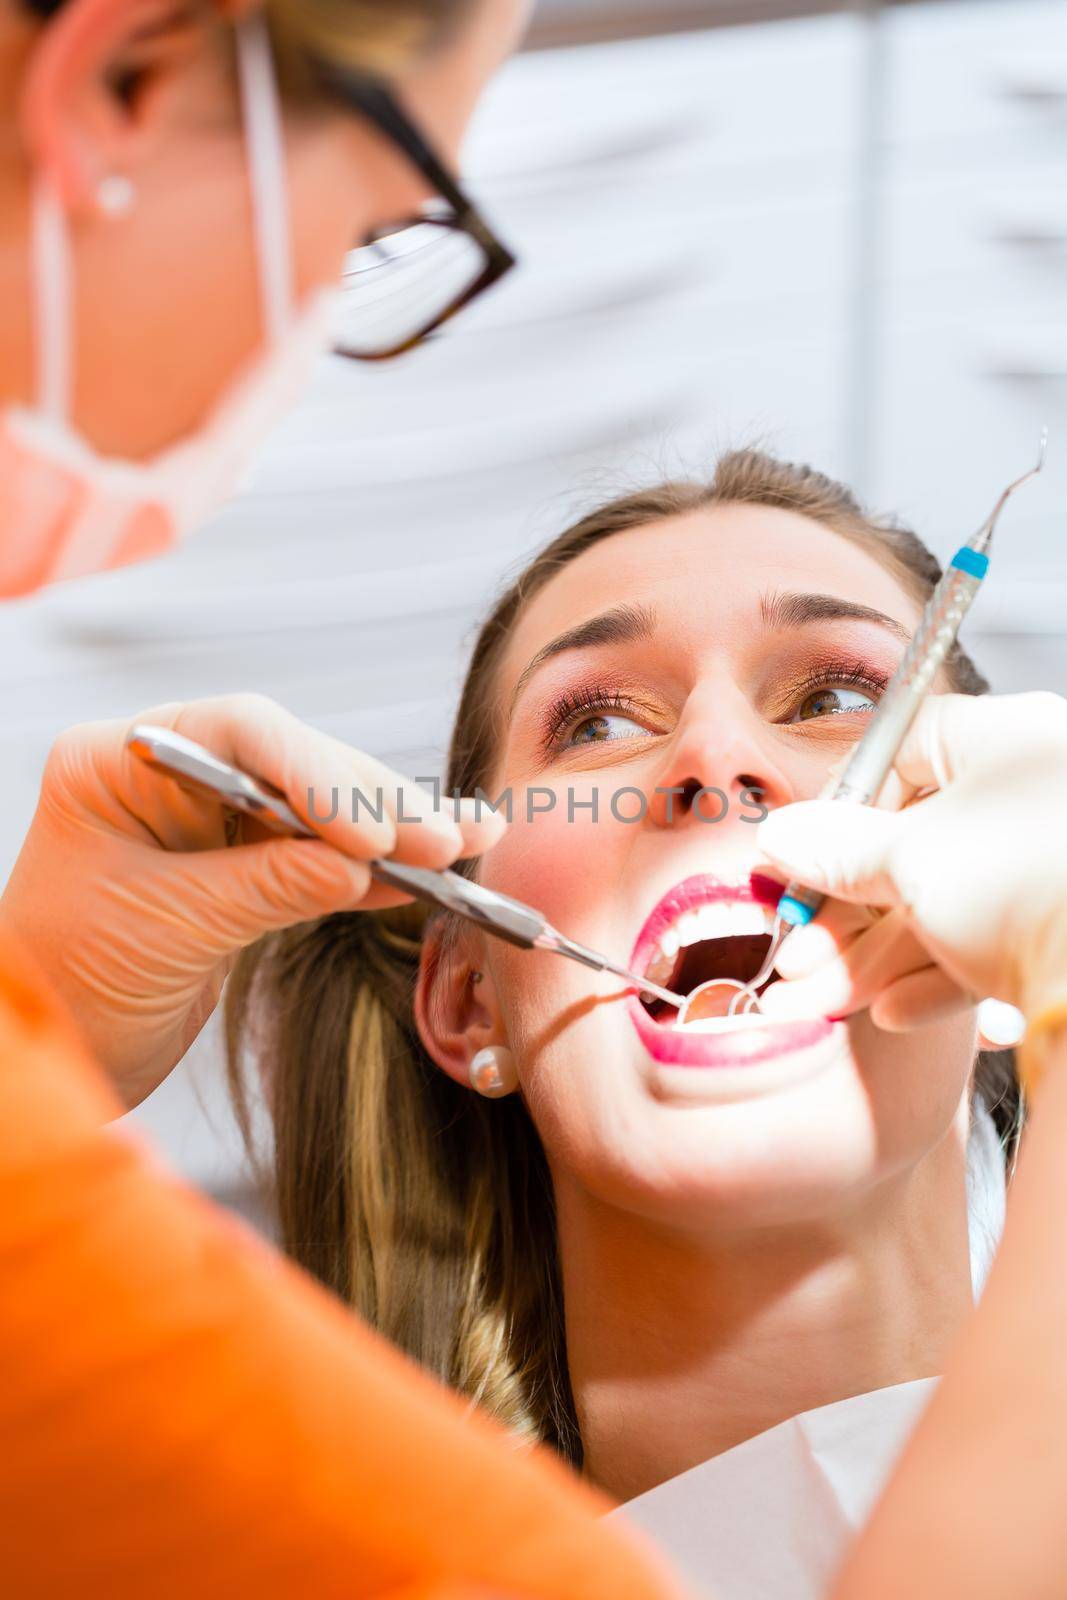 Patient having deep dental tooth cleaning at dentist